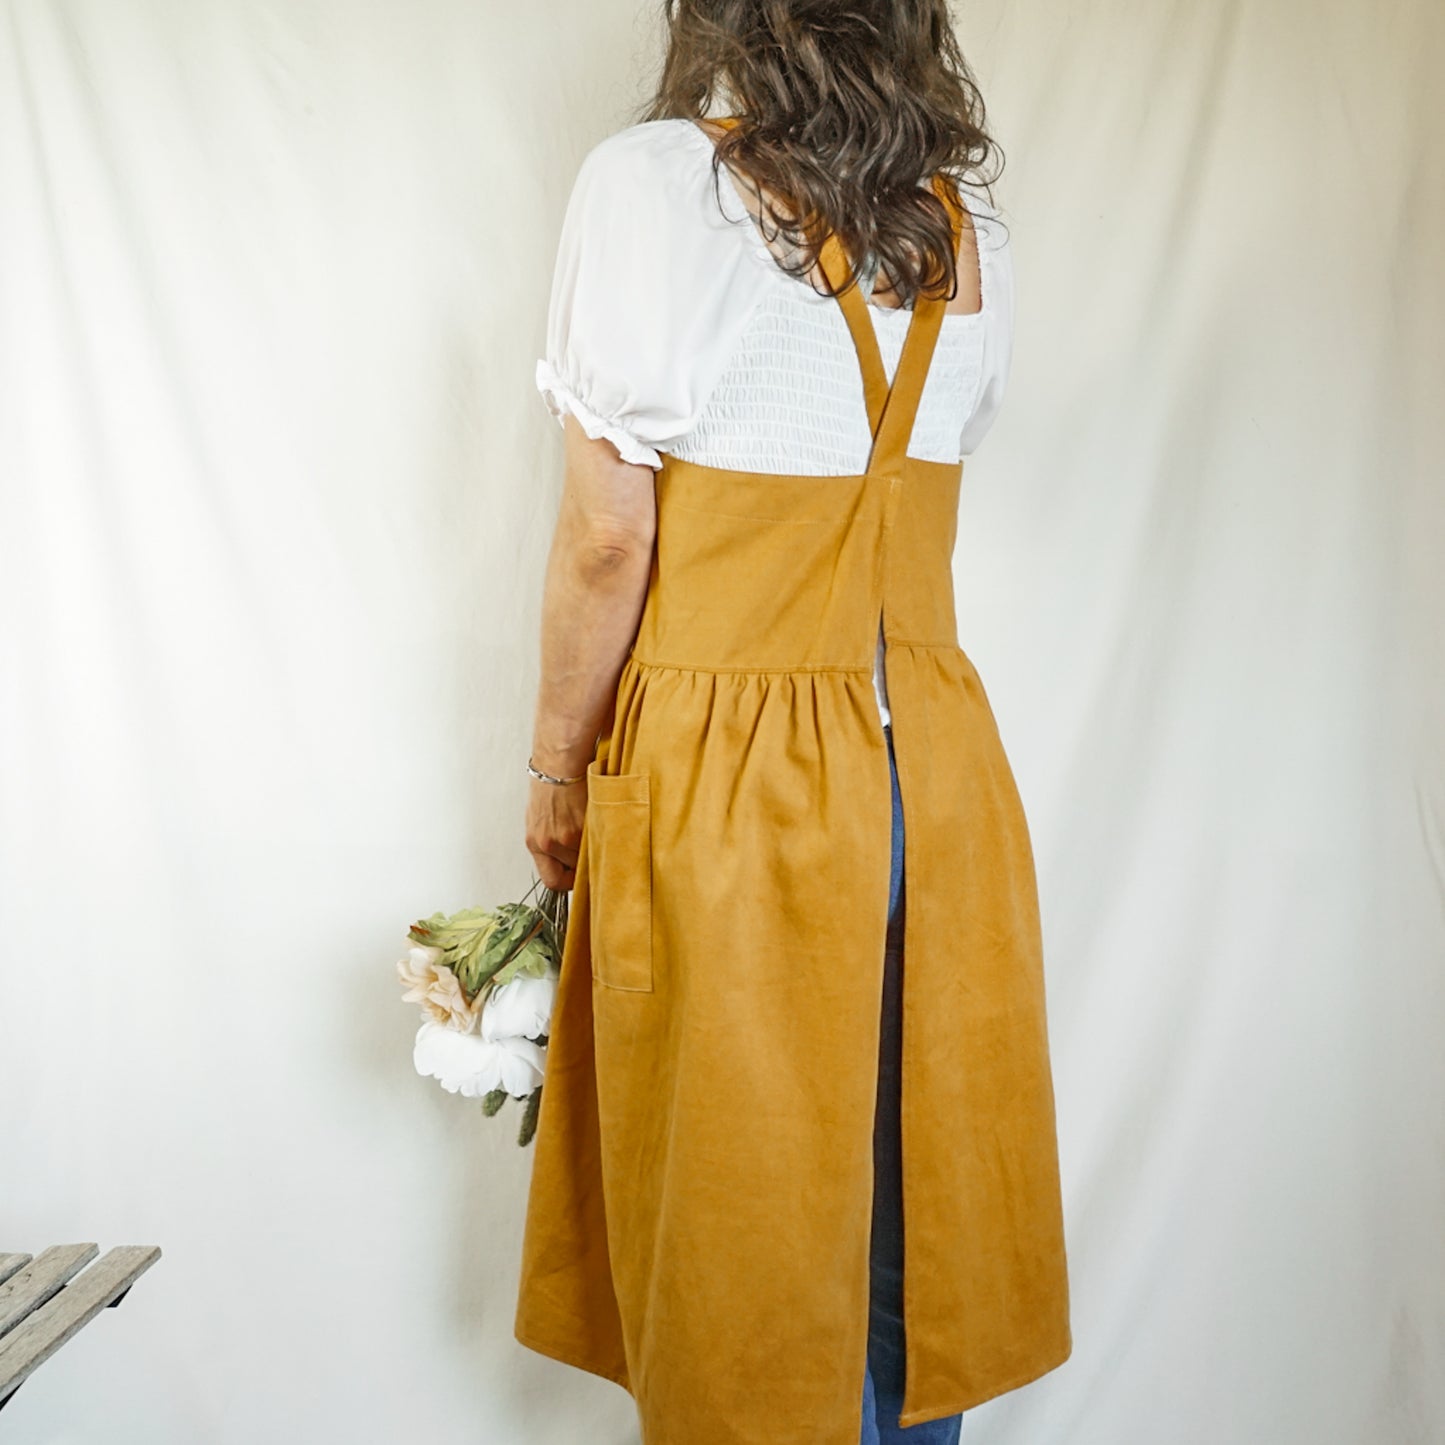 Cotton apron with cross back